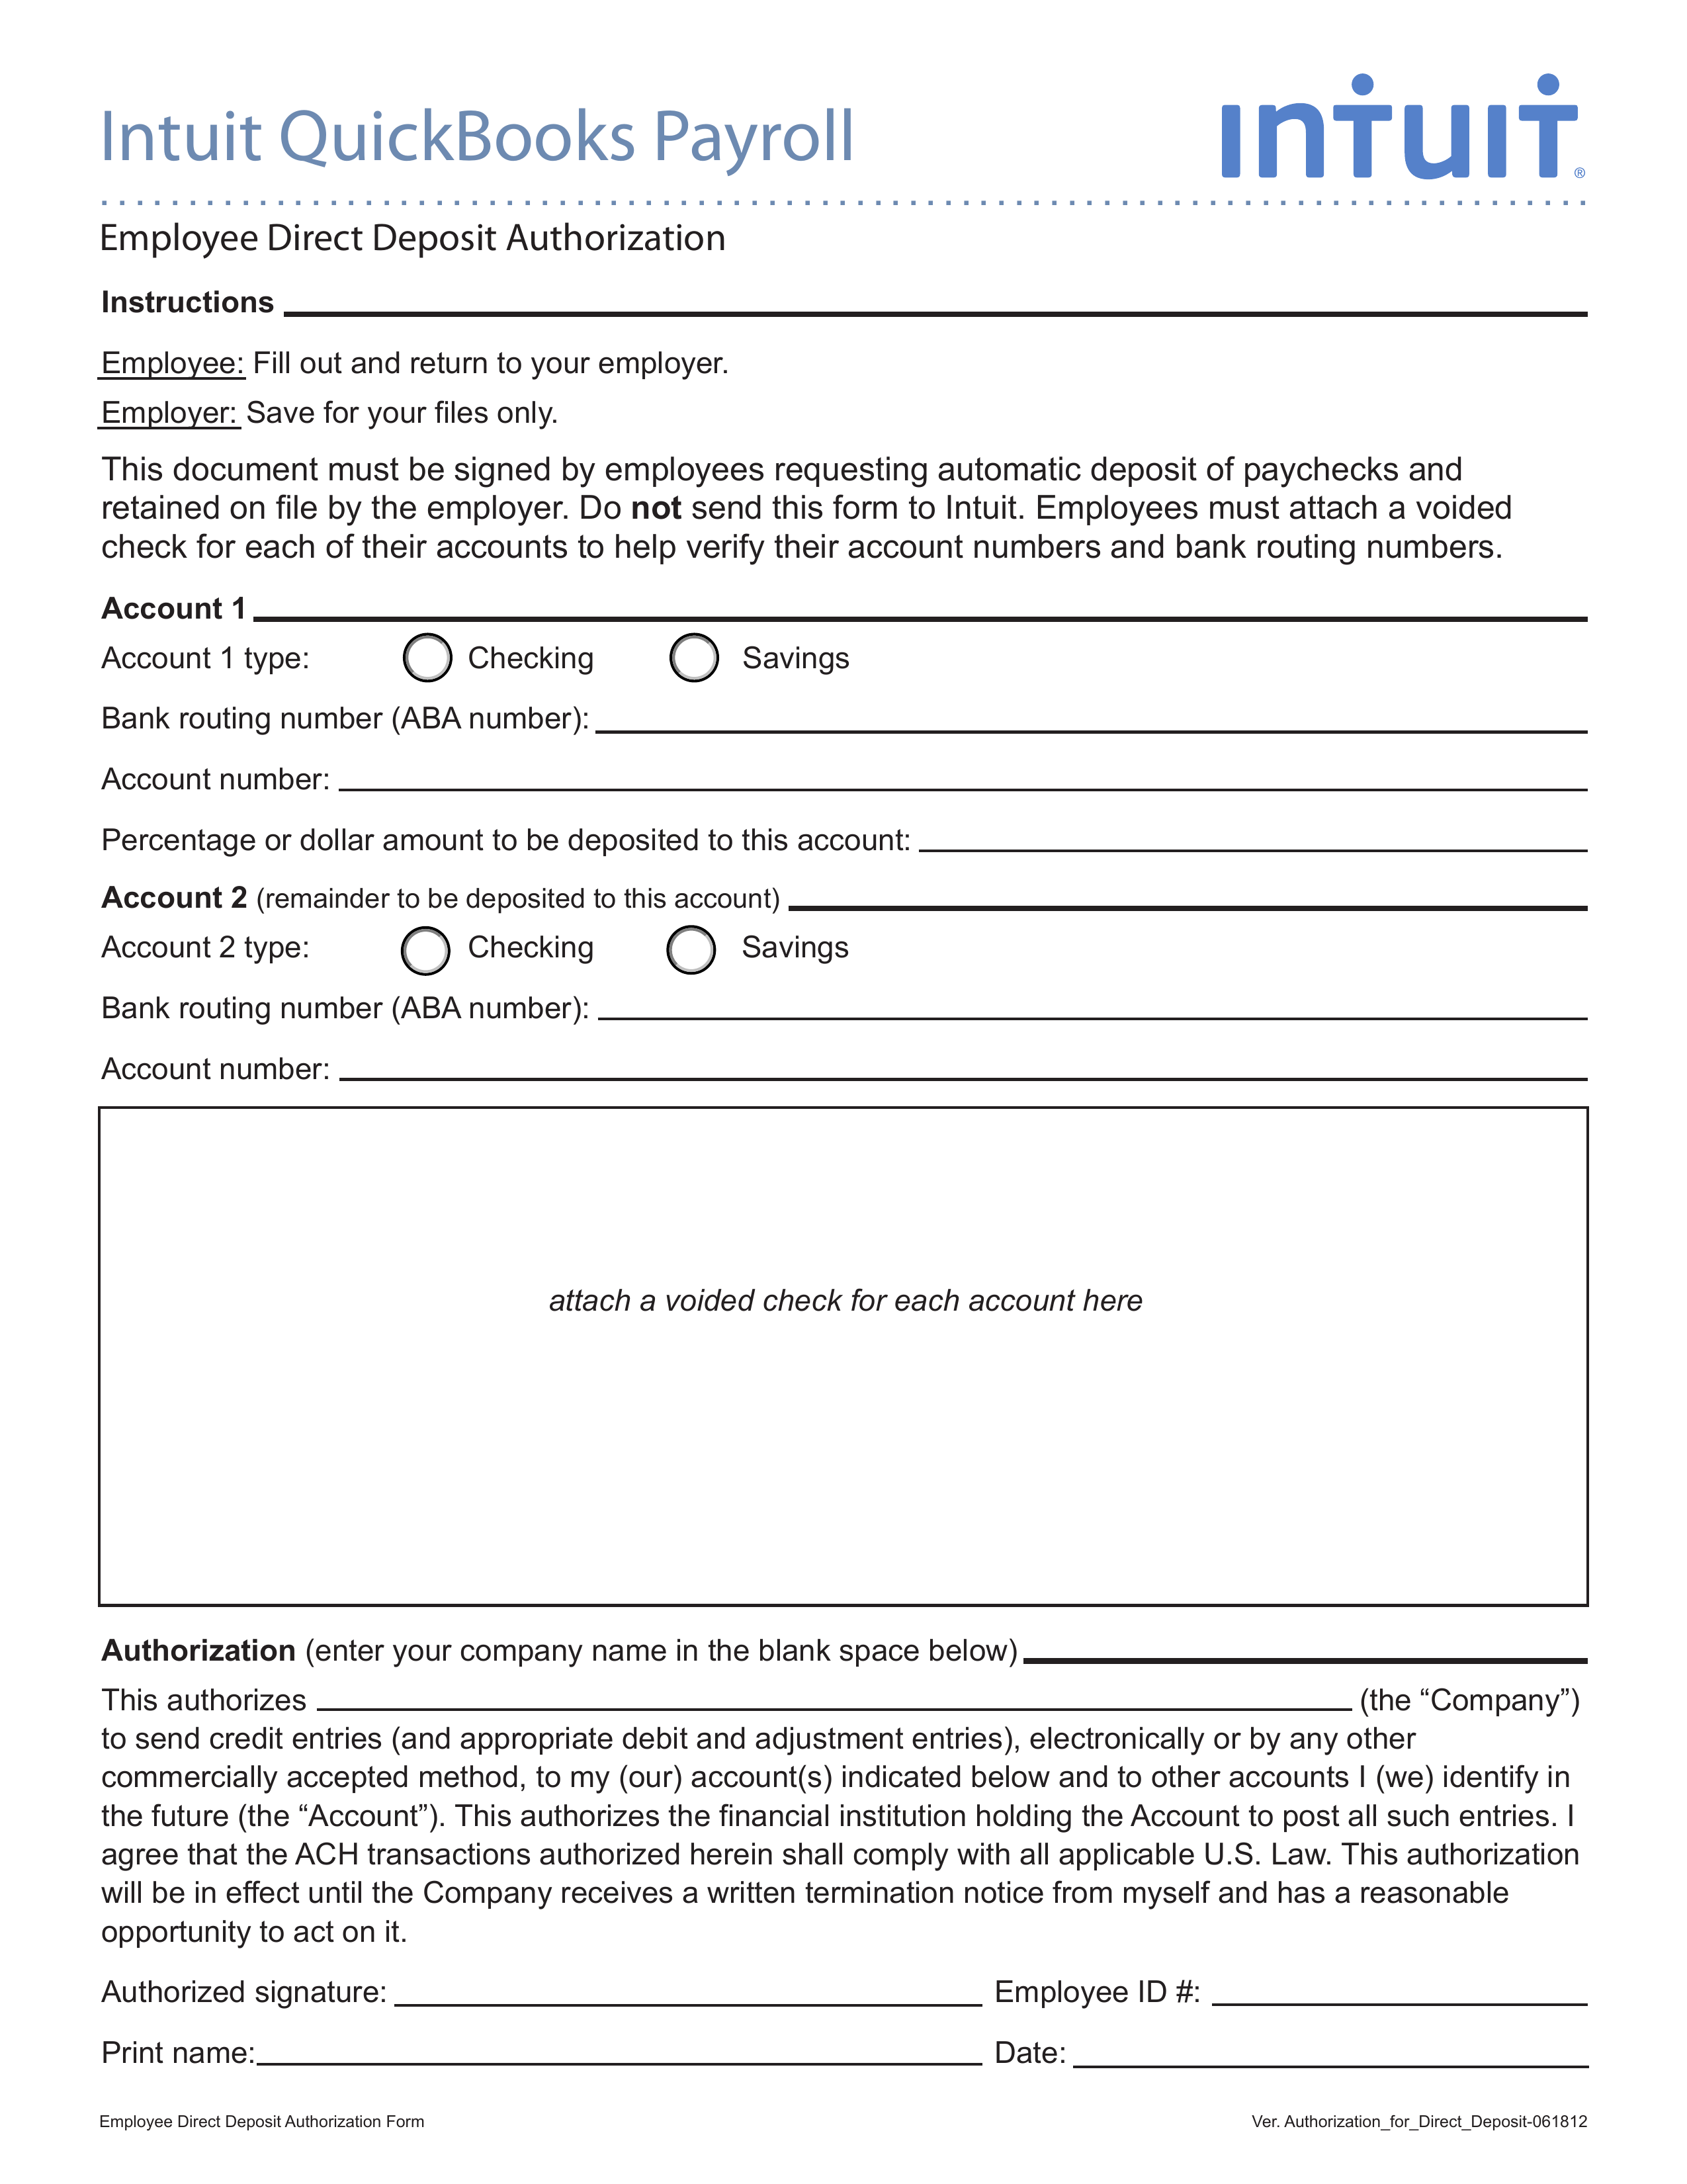 Free Intuit/Quickbooks Payroll Direct Deposit Form - PDF – eForms Within Payroll Direct Deposit Authorization Form Template With Regard To Payroll Direct Deposit Authorization Form Template